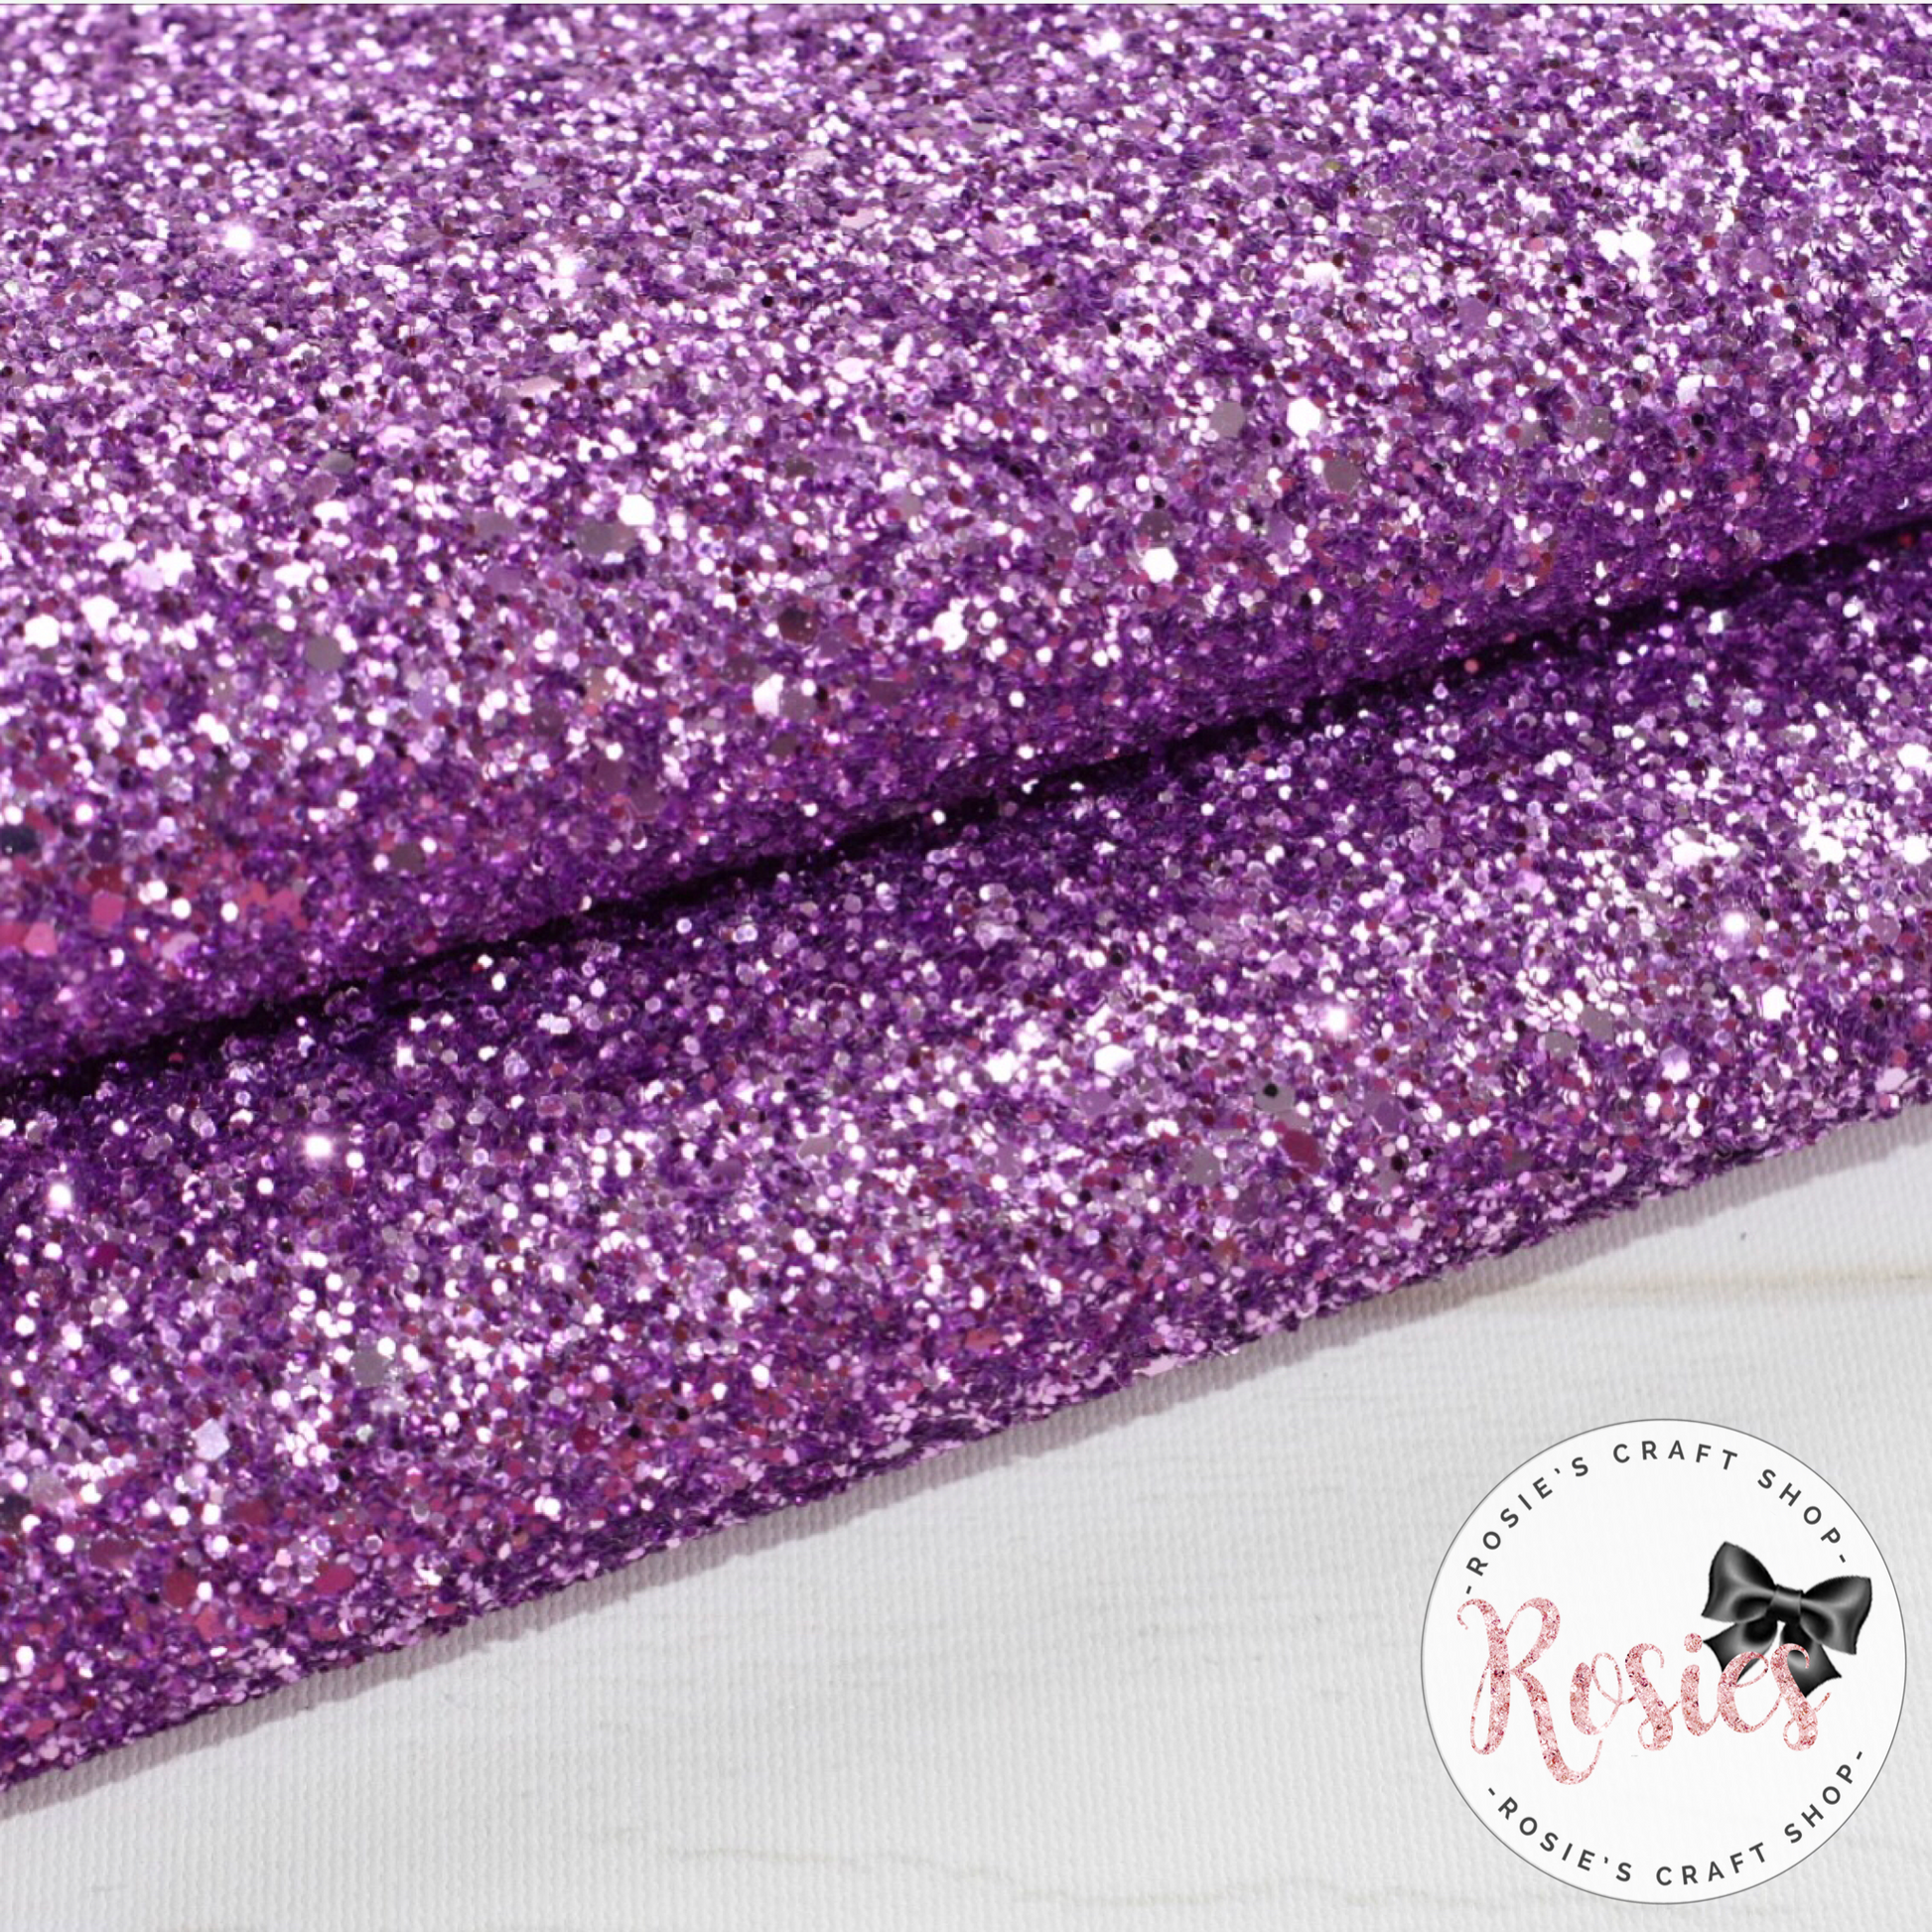 Lilac Chunky Glitter Fabric - Luxury Core Collection - Rosie's Craft Shop Ltd